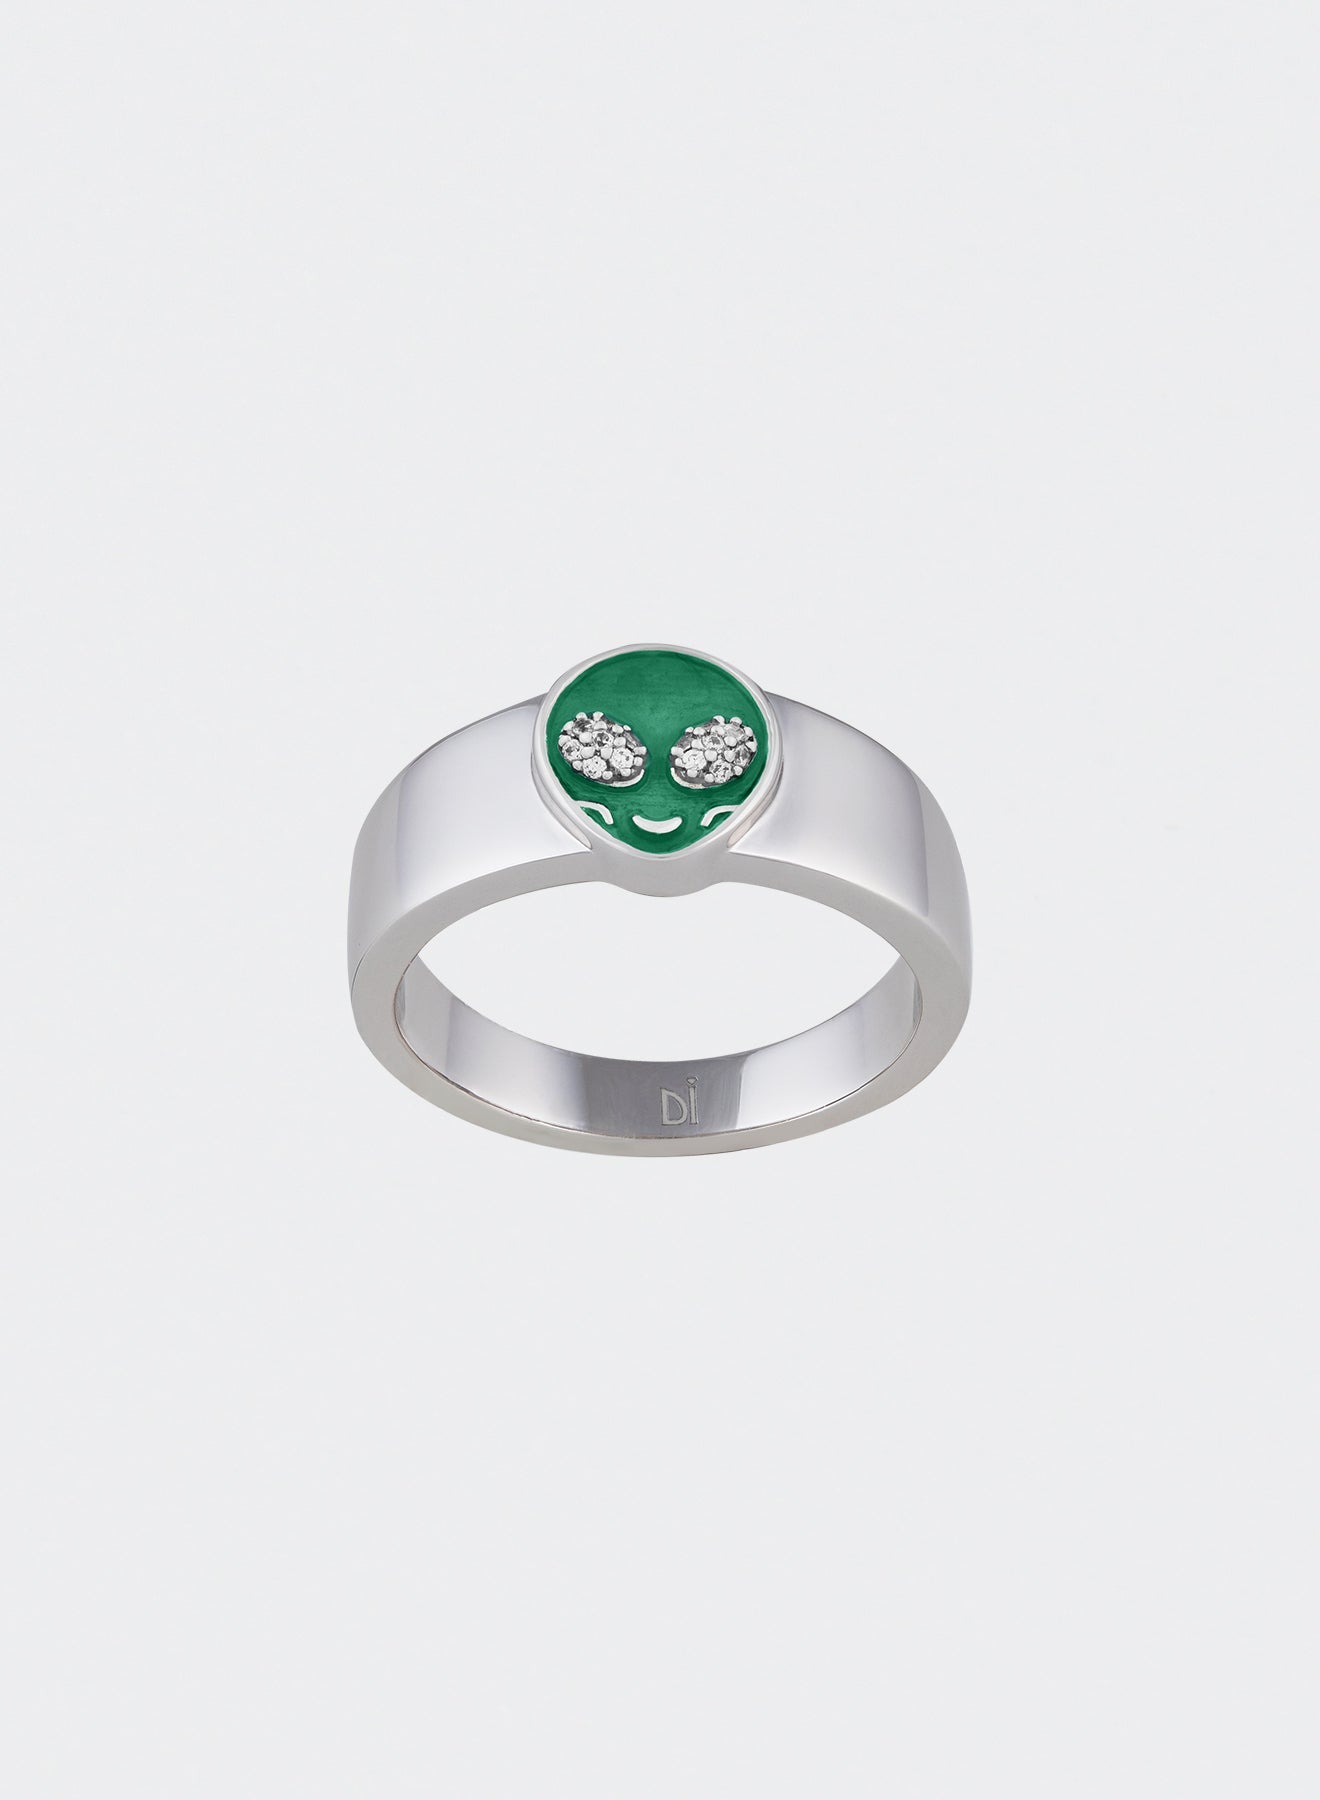 white ring with 18k gold plated and green alien face for man end woman